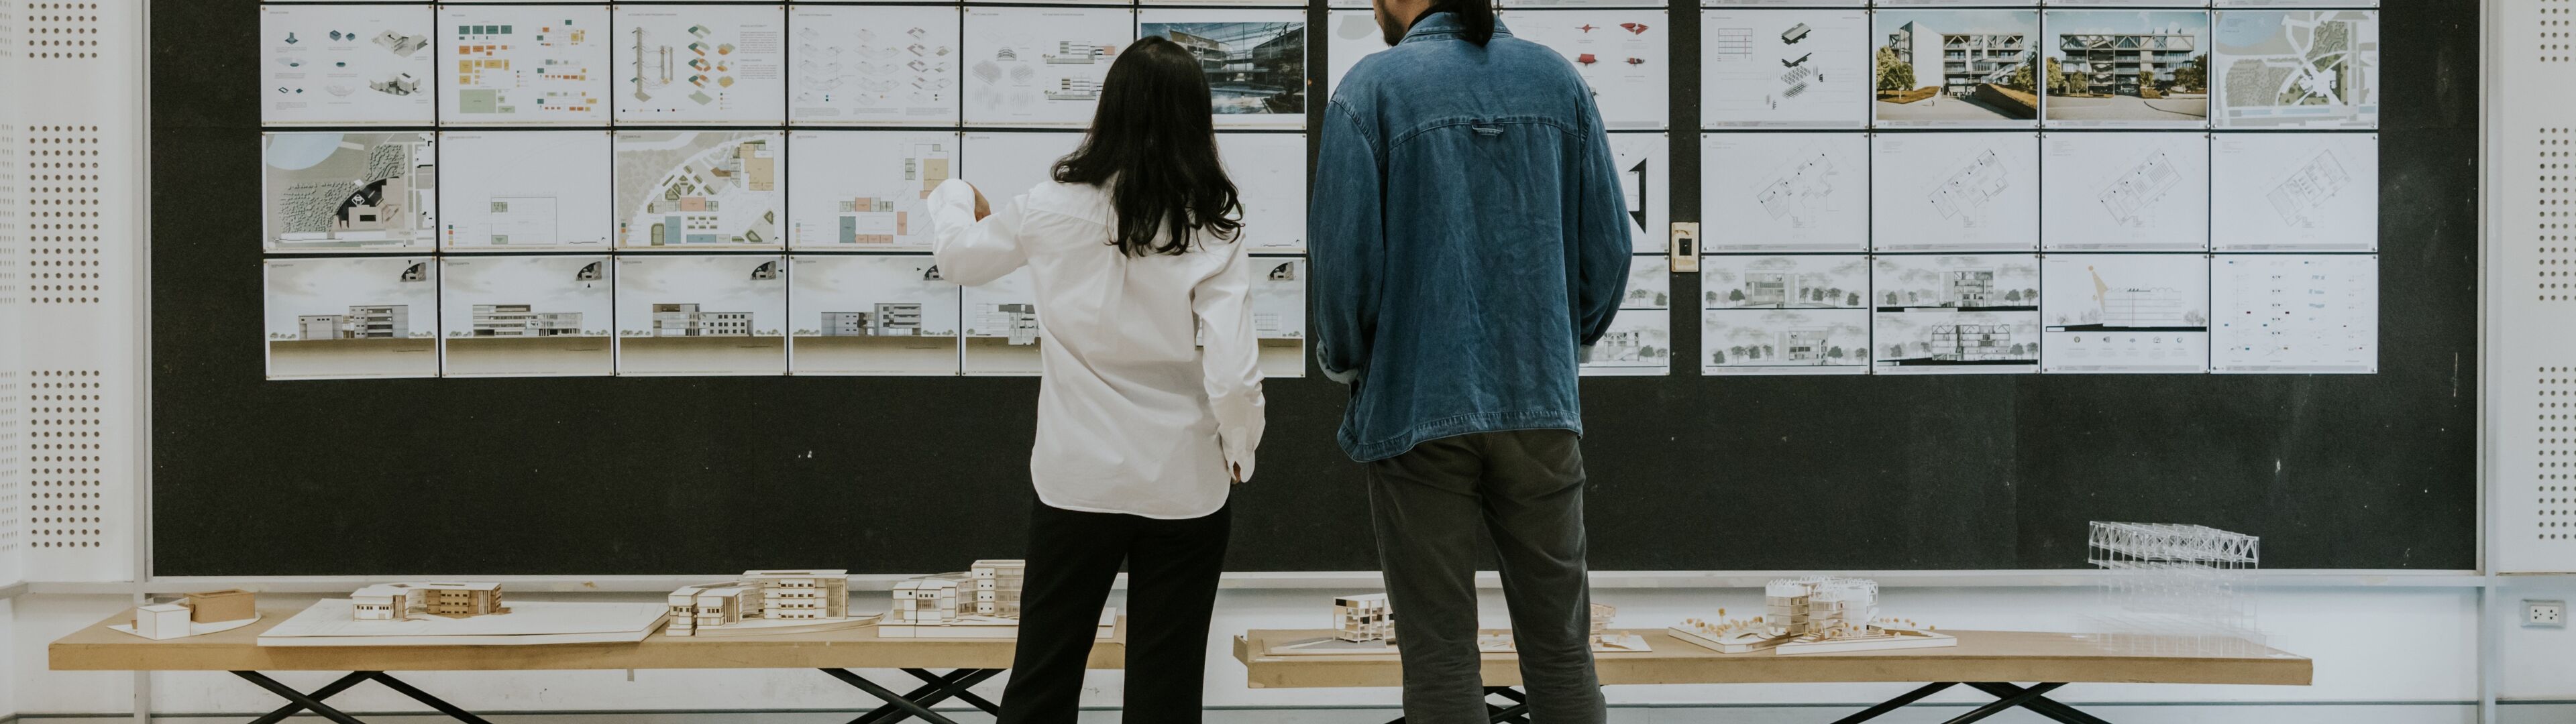 Two professionals evaluating architectural designs displayed on a board in a modern studio setting.